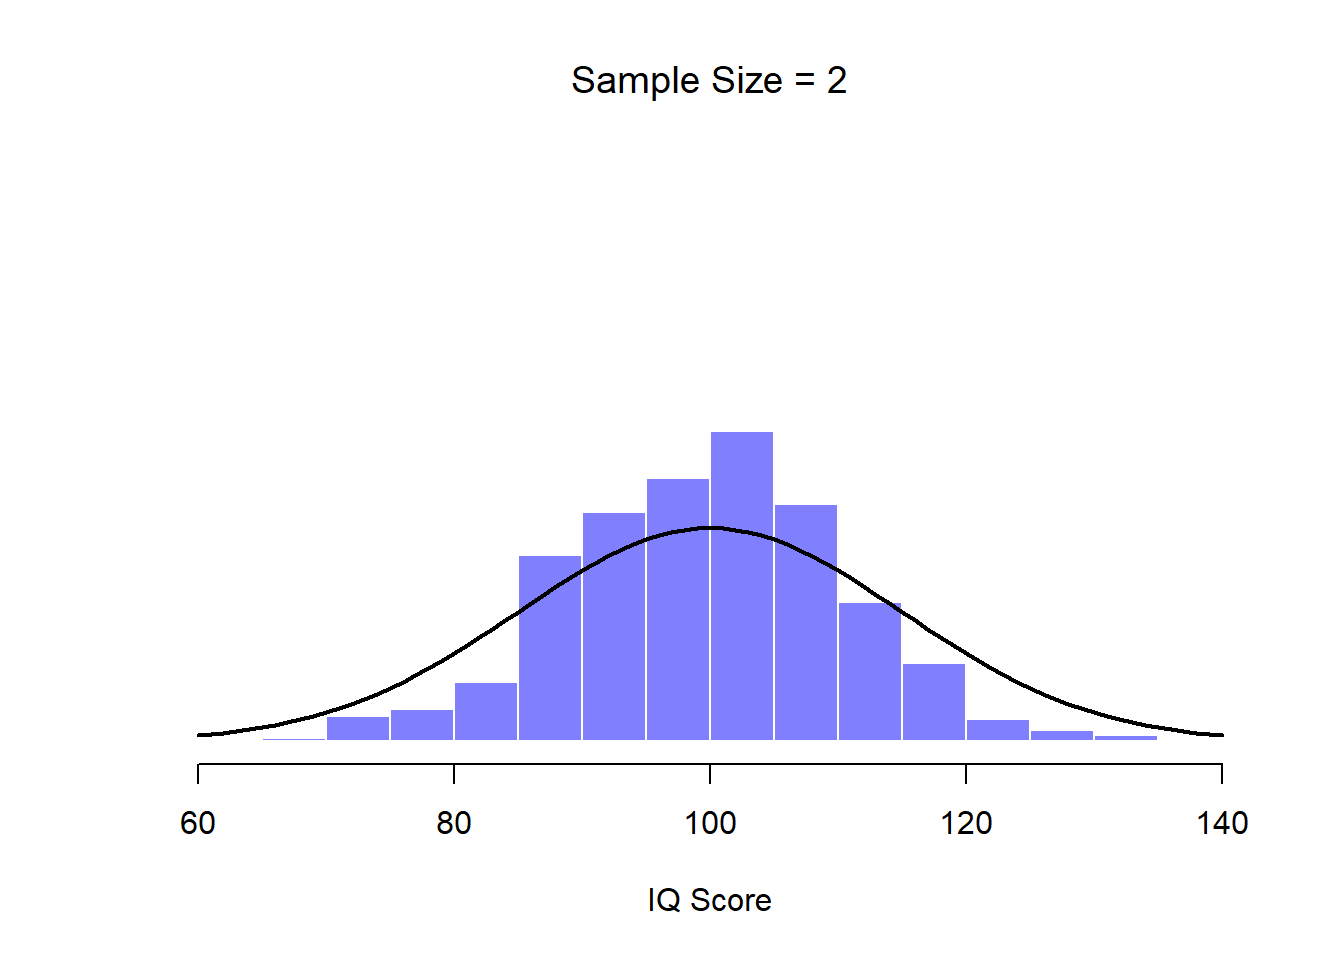 When we raise the sample size to 2, the mean of any one sample tends to be closer to the population mean than a one person's IQ score, and so the histogram (i.e., the sampling distribution) is a bit narrower than the population distribution.